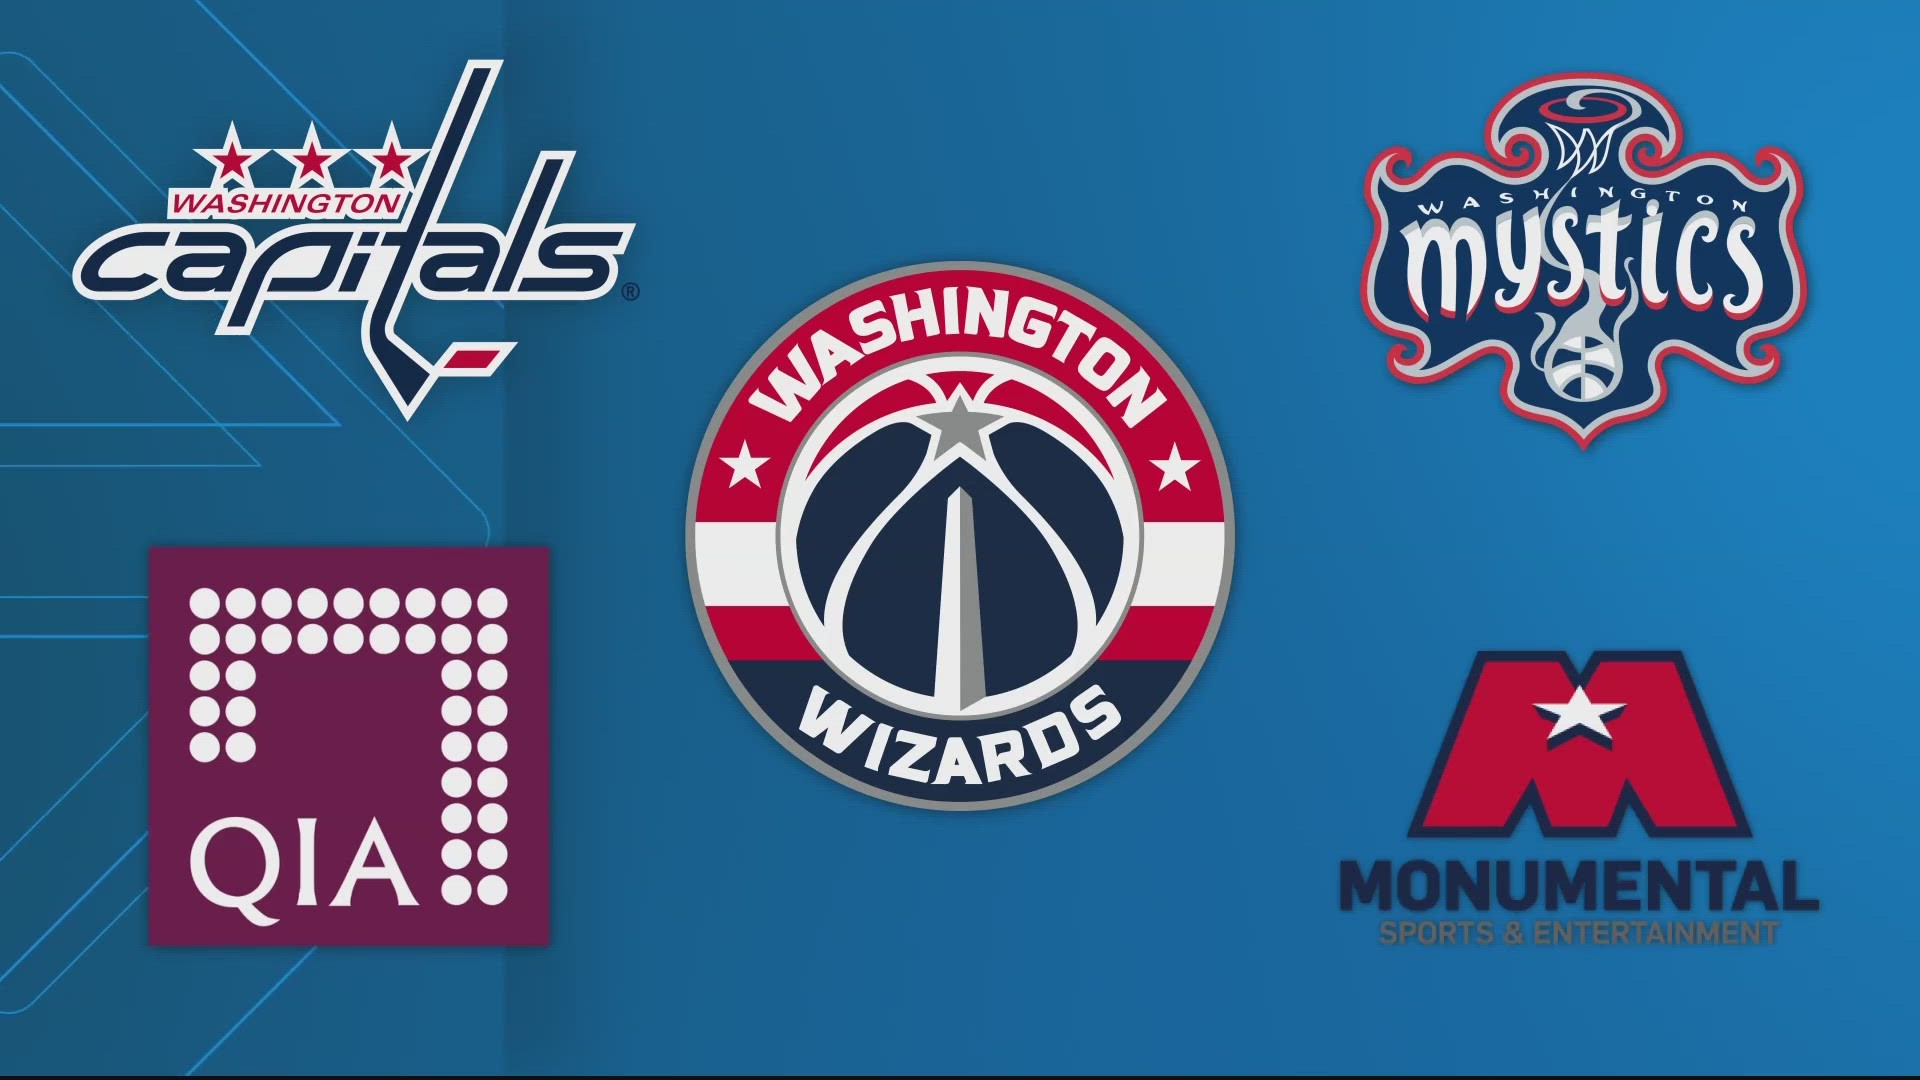 Qatar's sovereign wealth fund is buying a roughly 5-percent stake in the parent company of several D-C sports teams. The Wizards, the Capitals, and the Mystics.